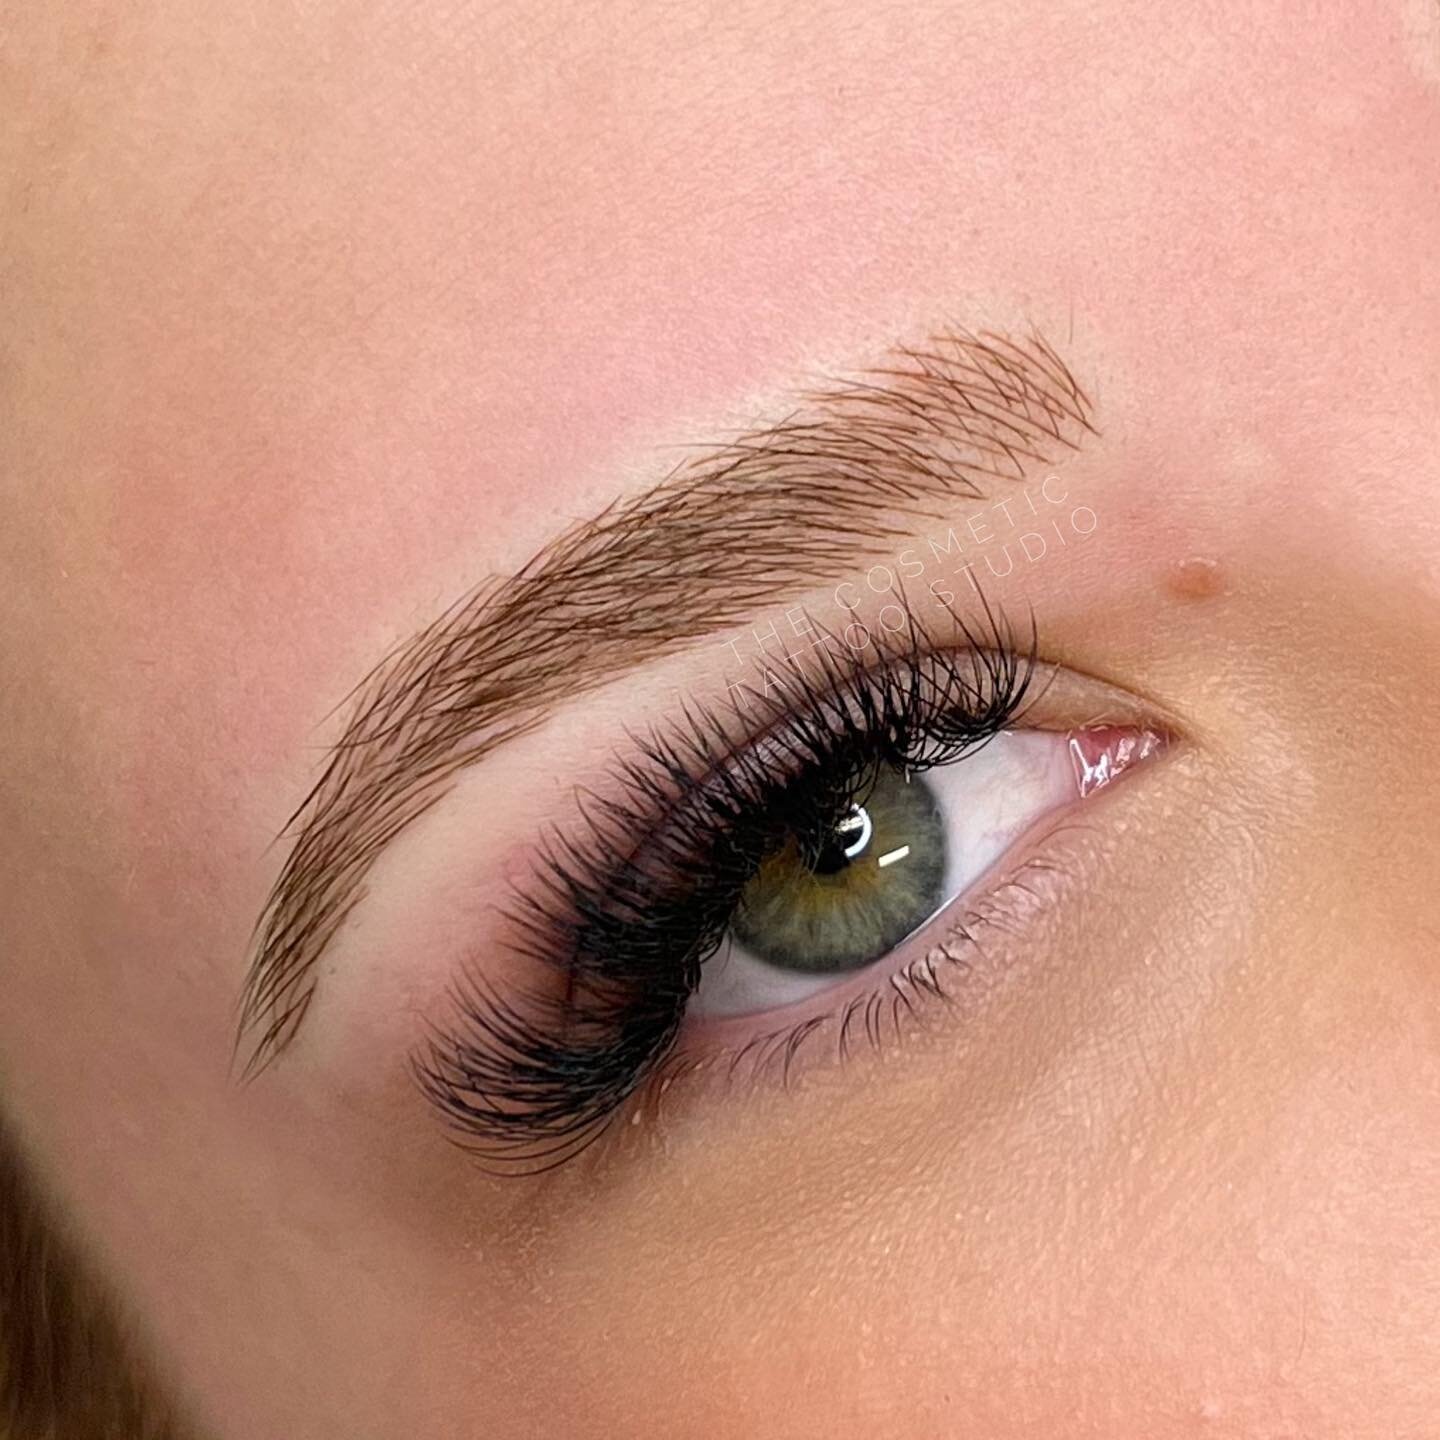 Fluffy #feathertouch strokes adding texture and colour to these beautiful brows ✨

Artist: Bodi

Using @permablend_pigments in Dark Teddy and Truffle Dream #pbselectteam #permablendpigments

MAY BOOKS are now open!

ONLINE BOOKINGS 
www.thecosmeticta